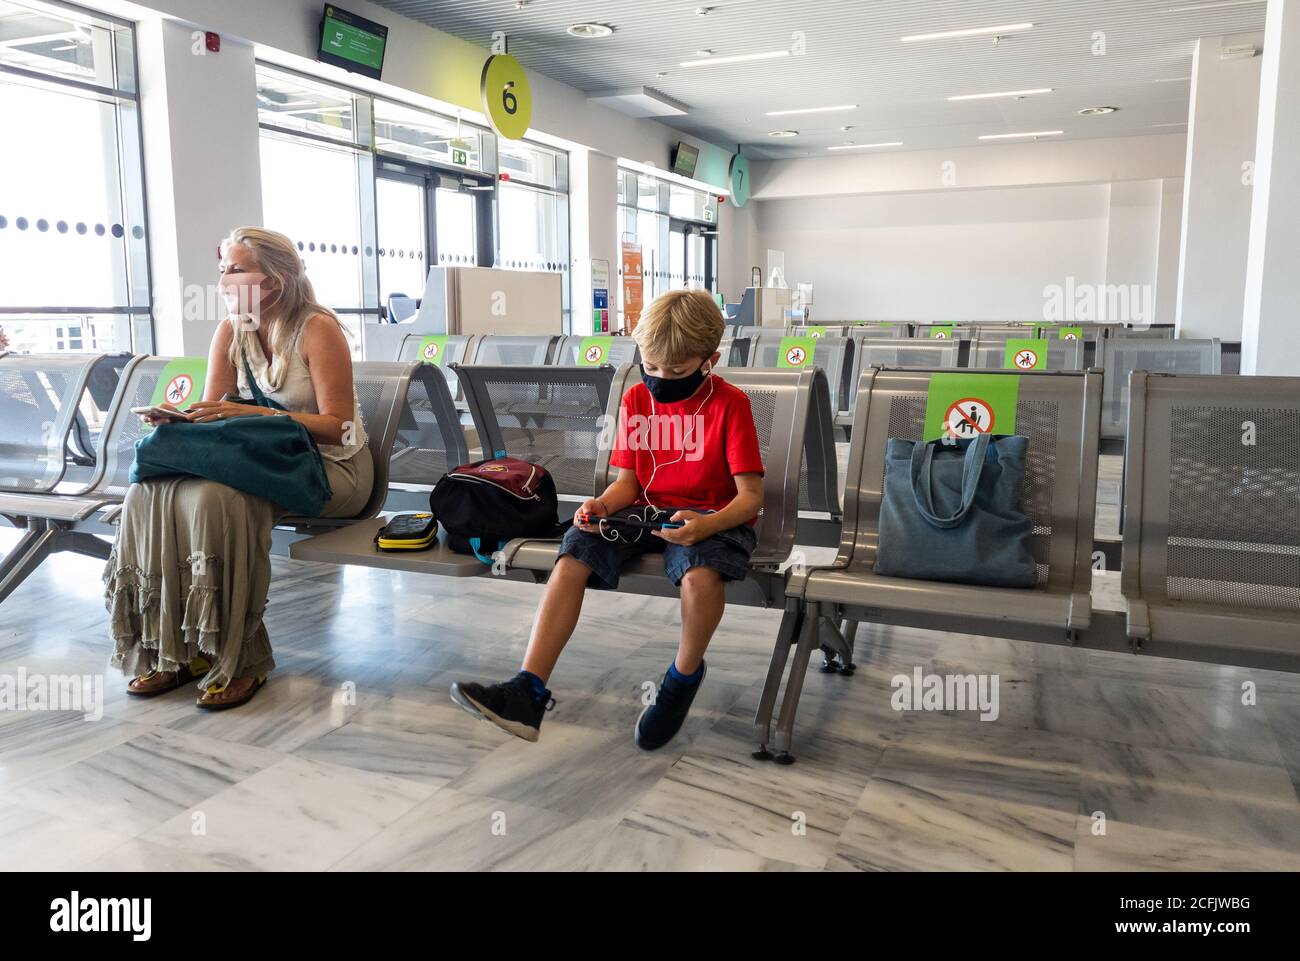 Holiday makers waiting for their return flight in the departure lounge of Aktion airport. Stock Photo